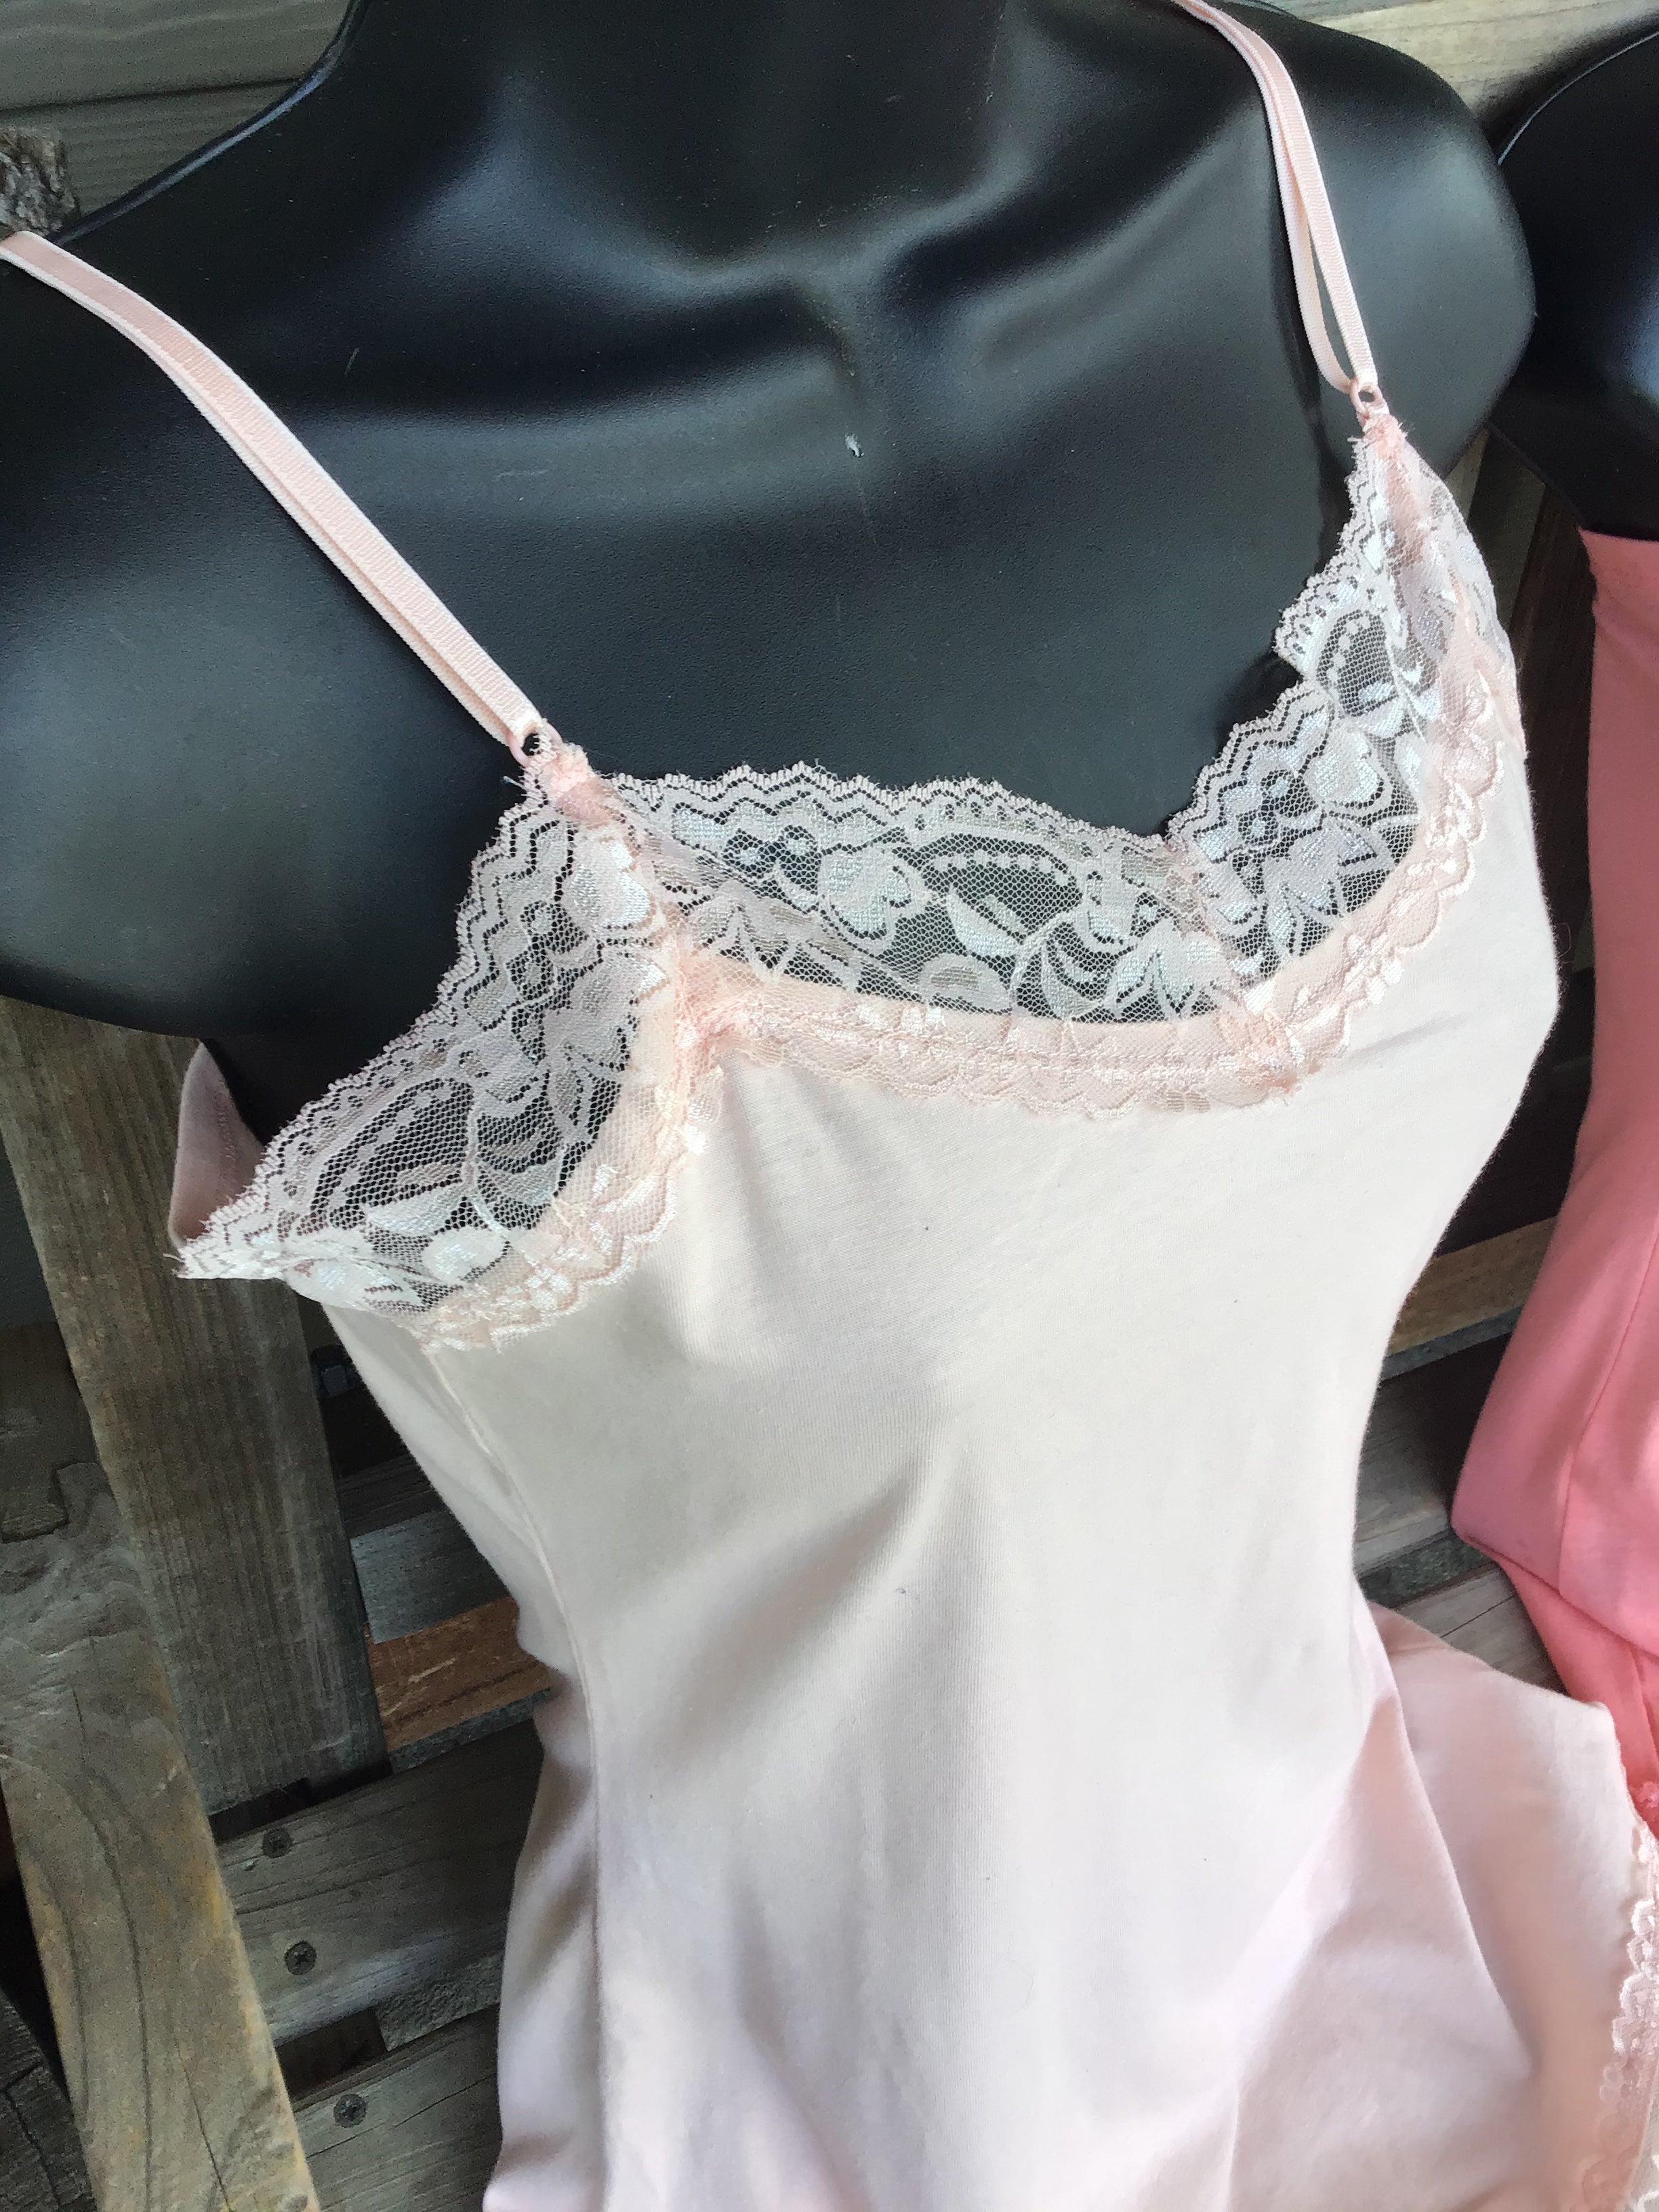 Fitted spaghetti strap top with lace detail. Junior Size. Colours soft peach coral and vibrant